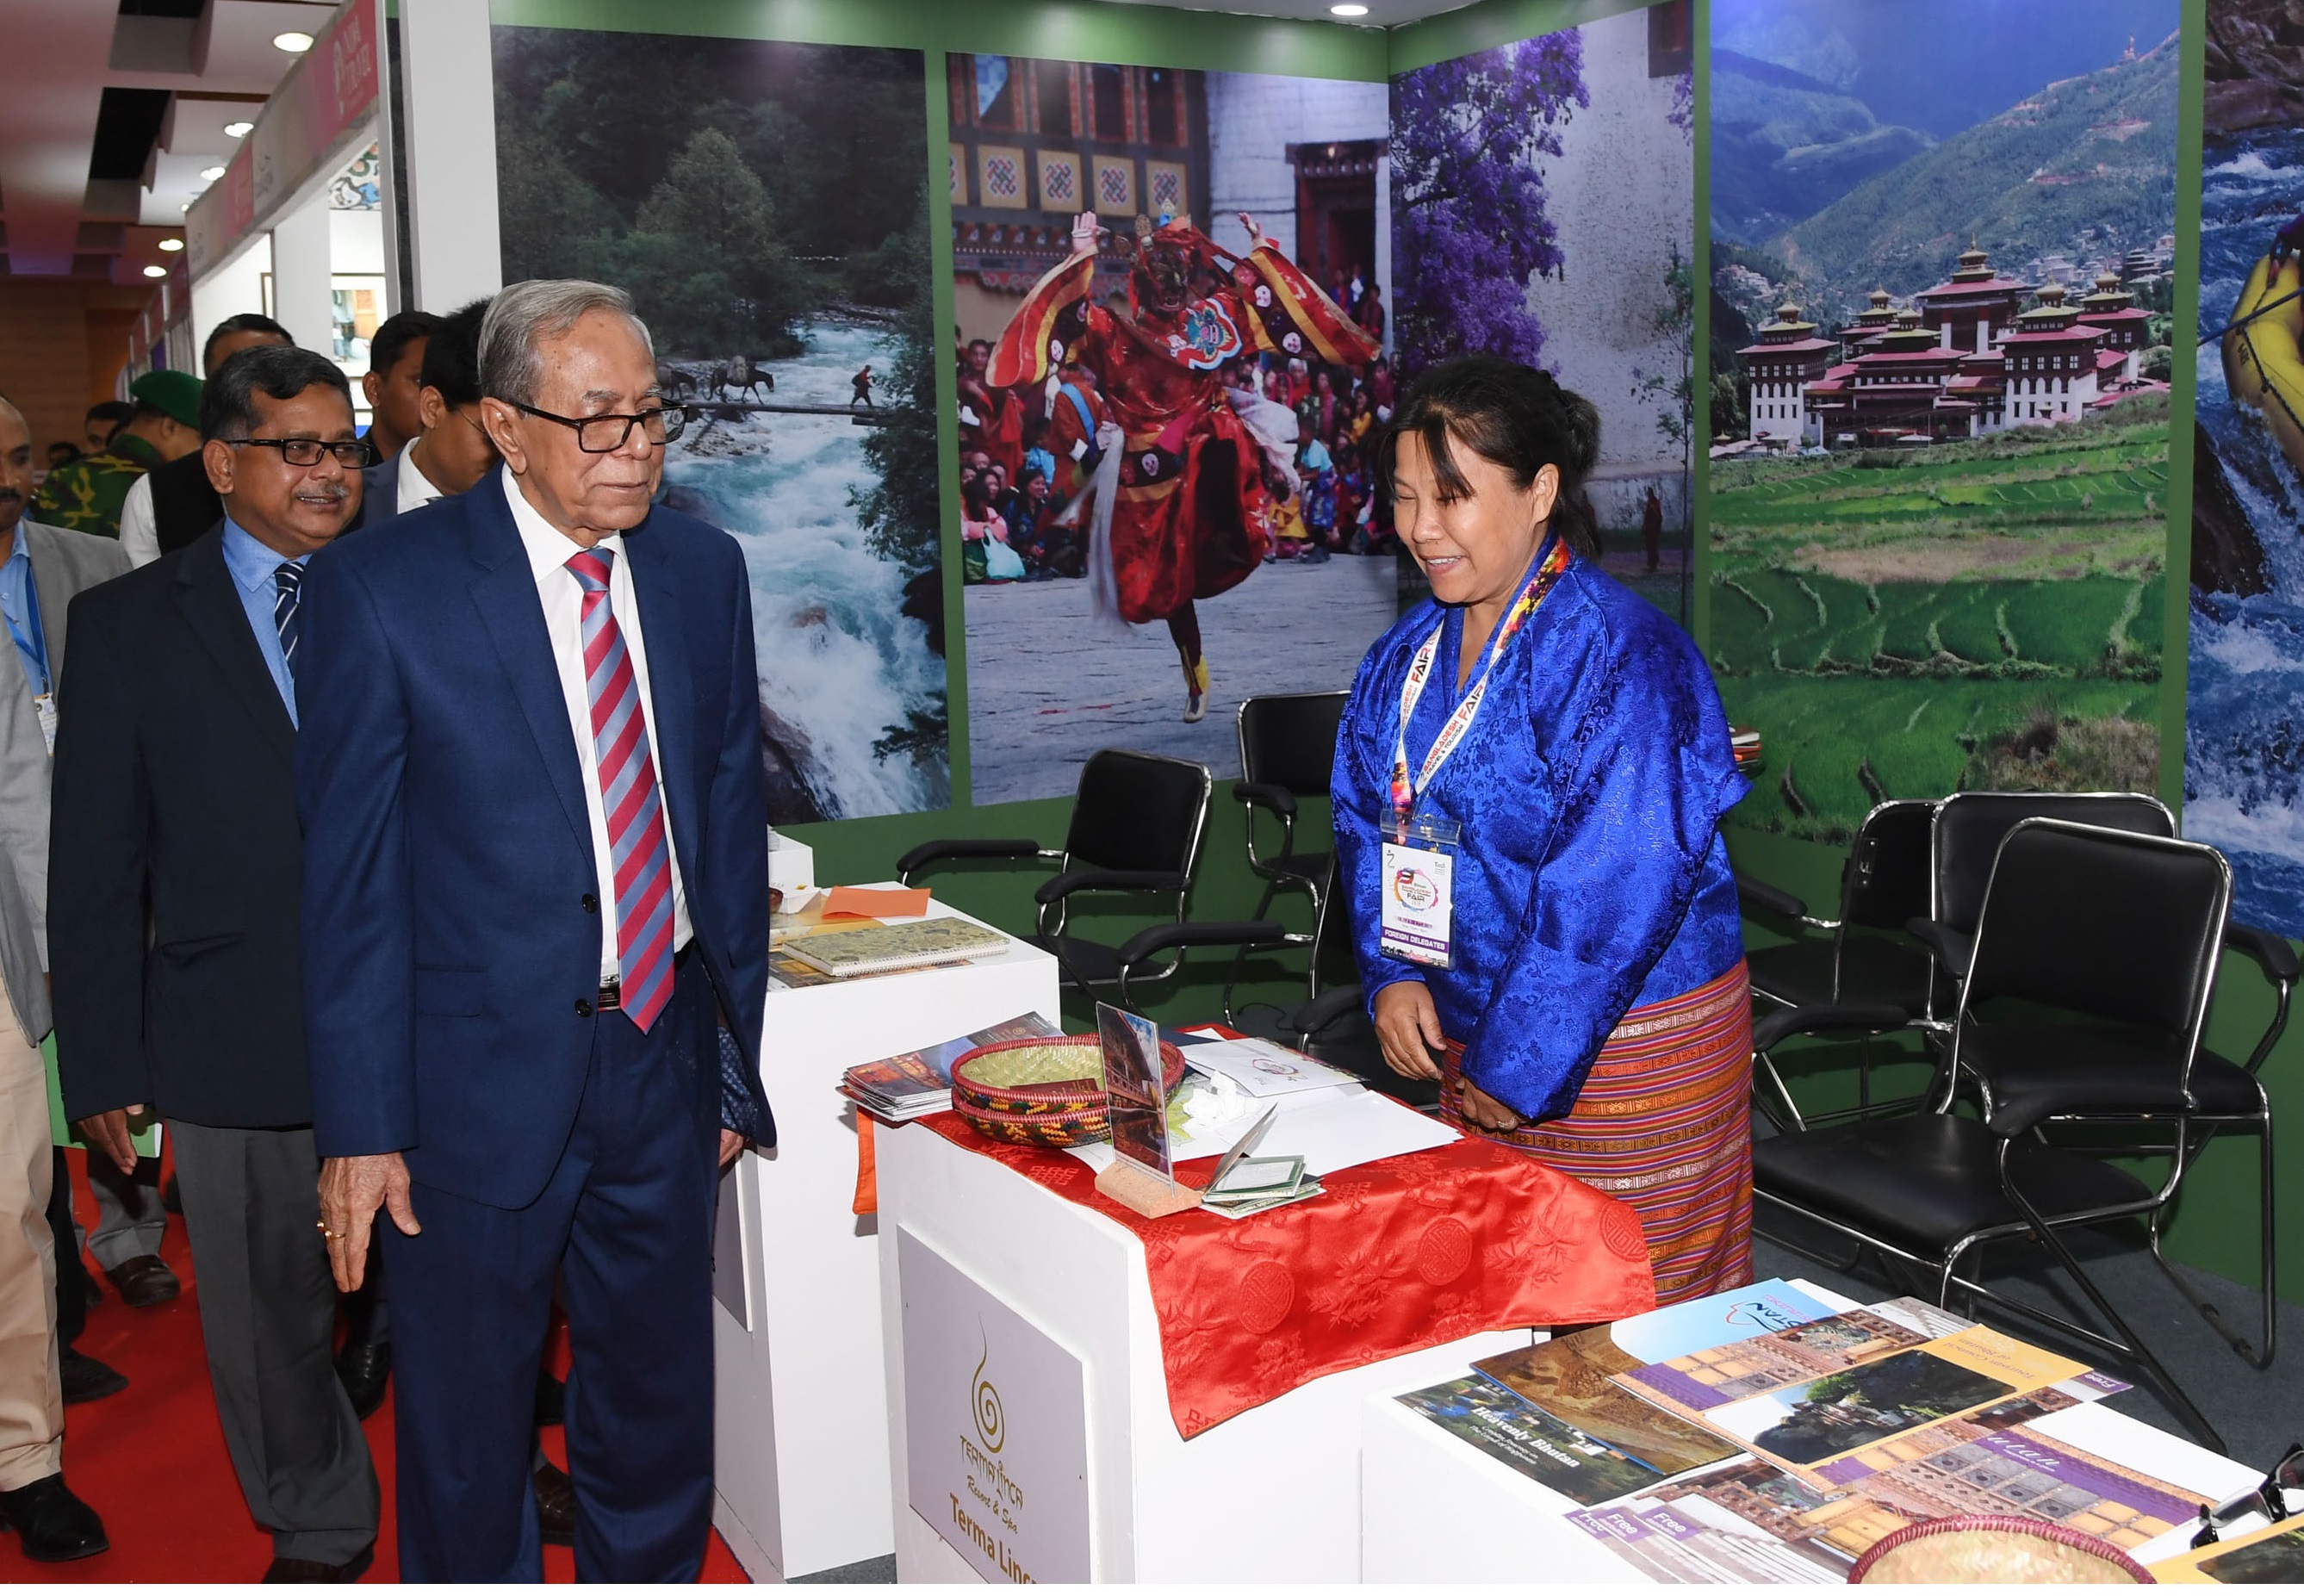 Show our heritage tourist spots to the world: President Hamid 